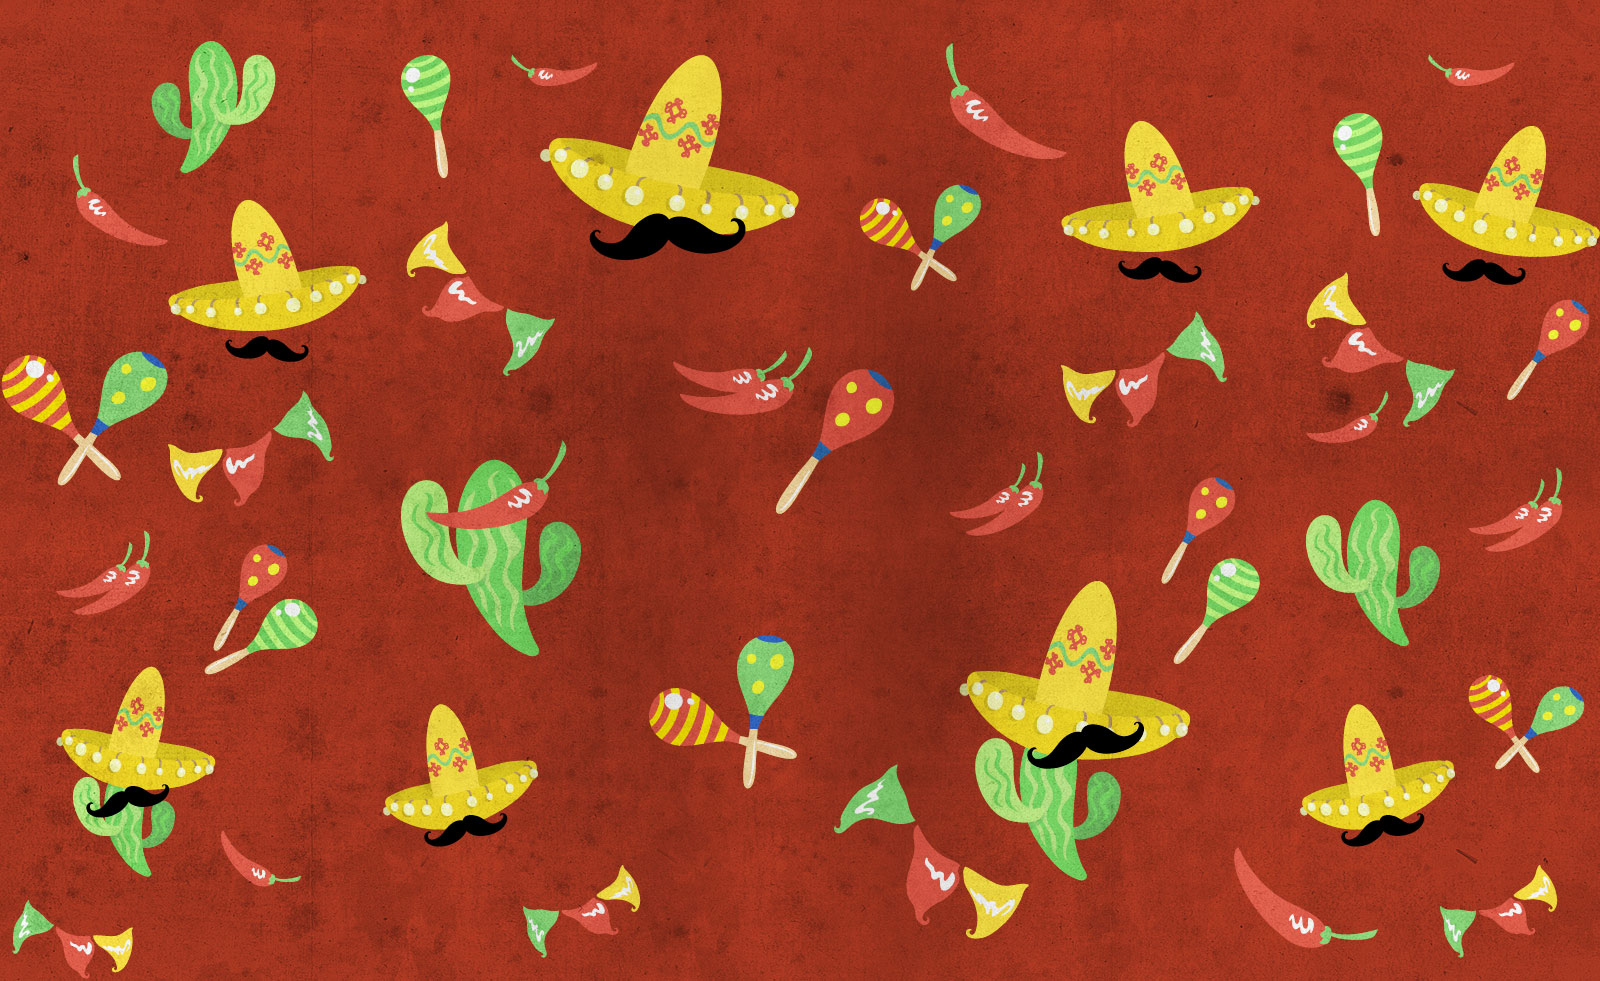 Mexican Fiesta Picture Backgrounds For Powerpoint Templates Ppt Backgrounds